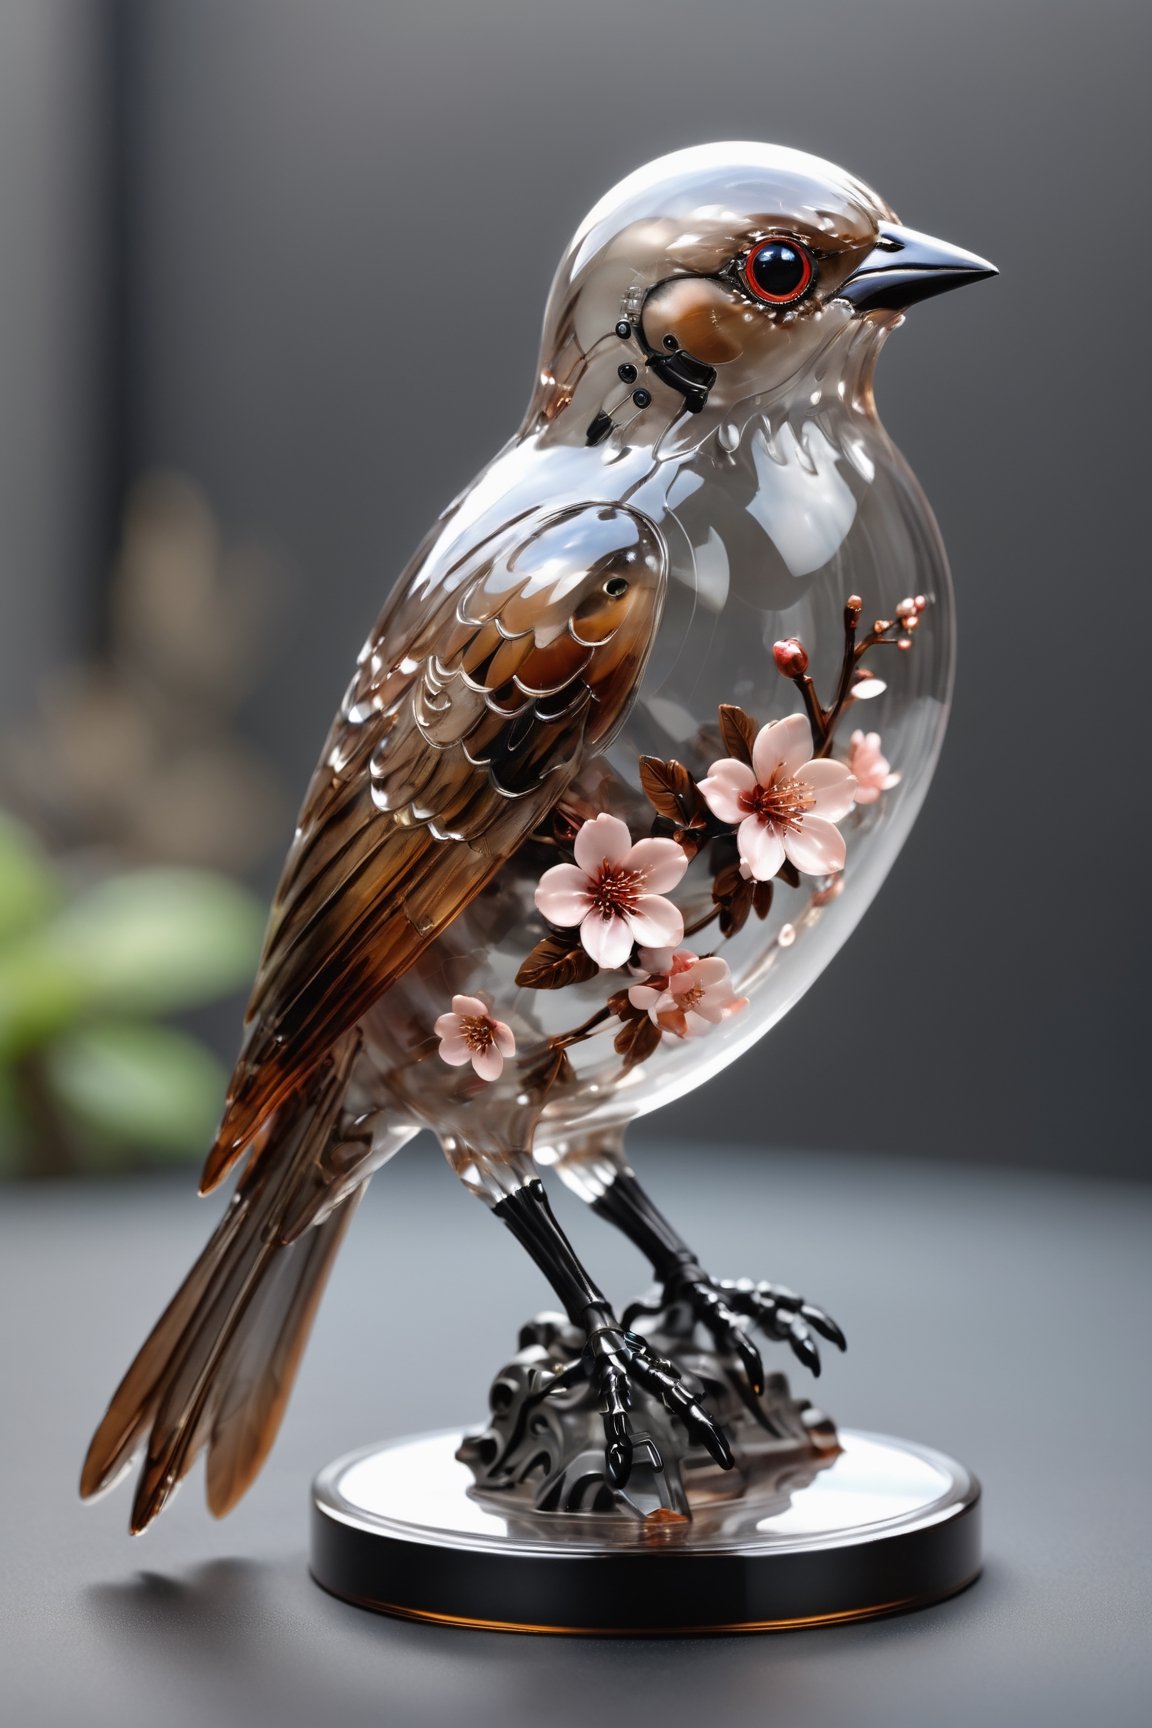 CHERRYBLOSSOM TREE,Transparent Cyborg Grayish Baywing,glass made mechanical cute bird about 7 inches long,(brownish-gray plumage), the wings feathers have a reddish-brown tone, The region between the eyes and nostrils is black,  it has black eyes,  black legs,okeh,japanese art,c1bo,japanese style,Clear Glass Skin